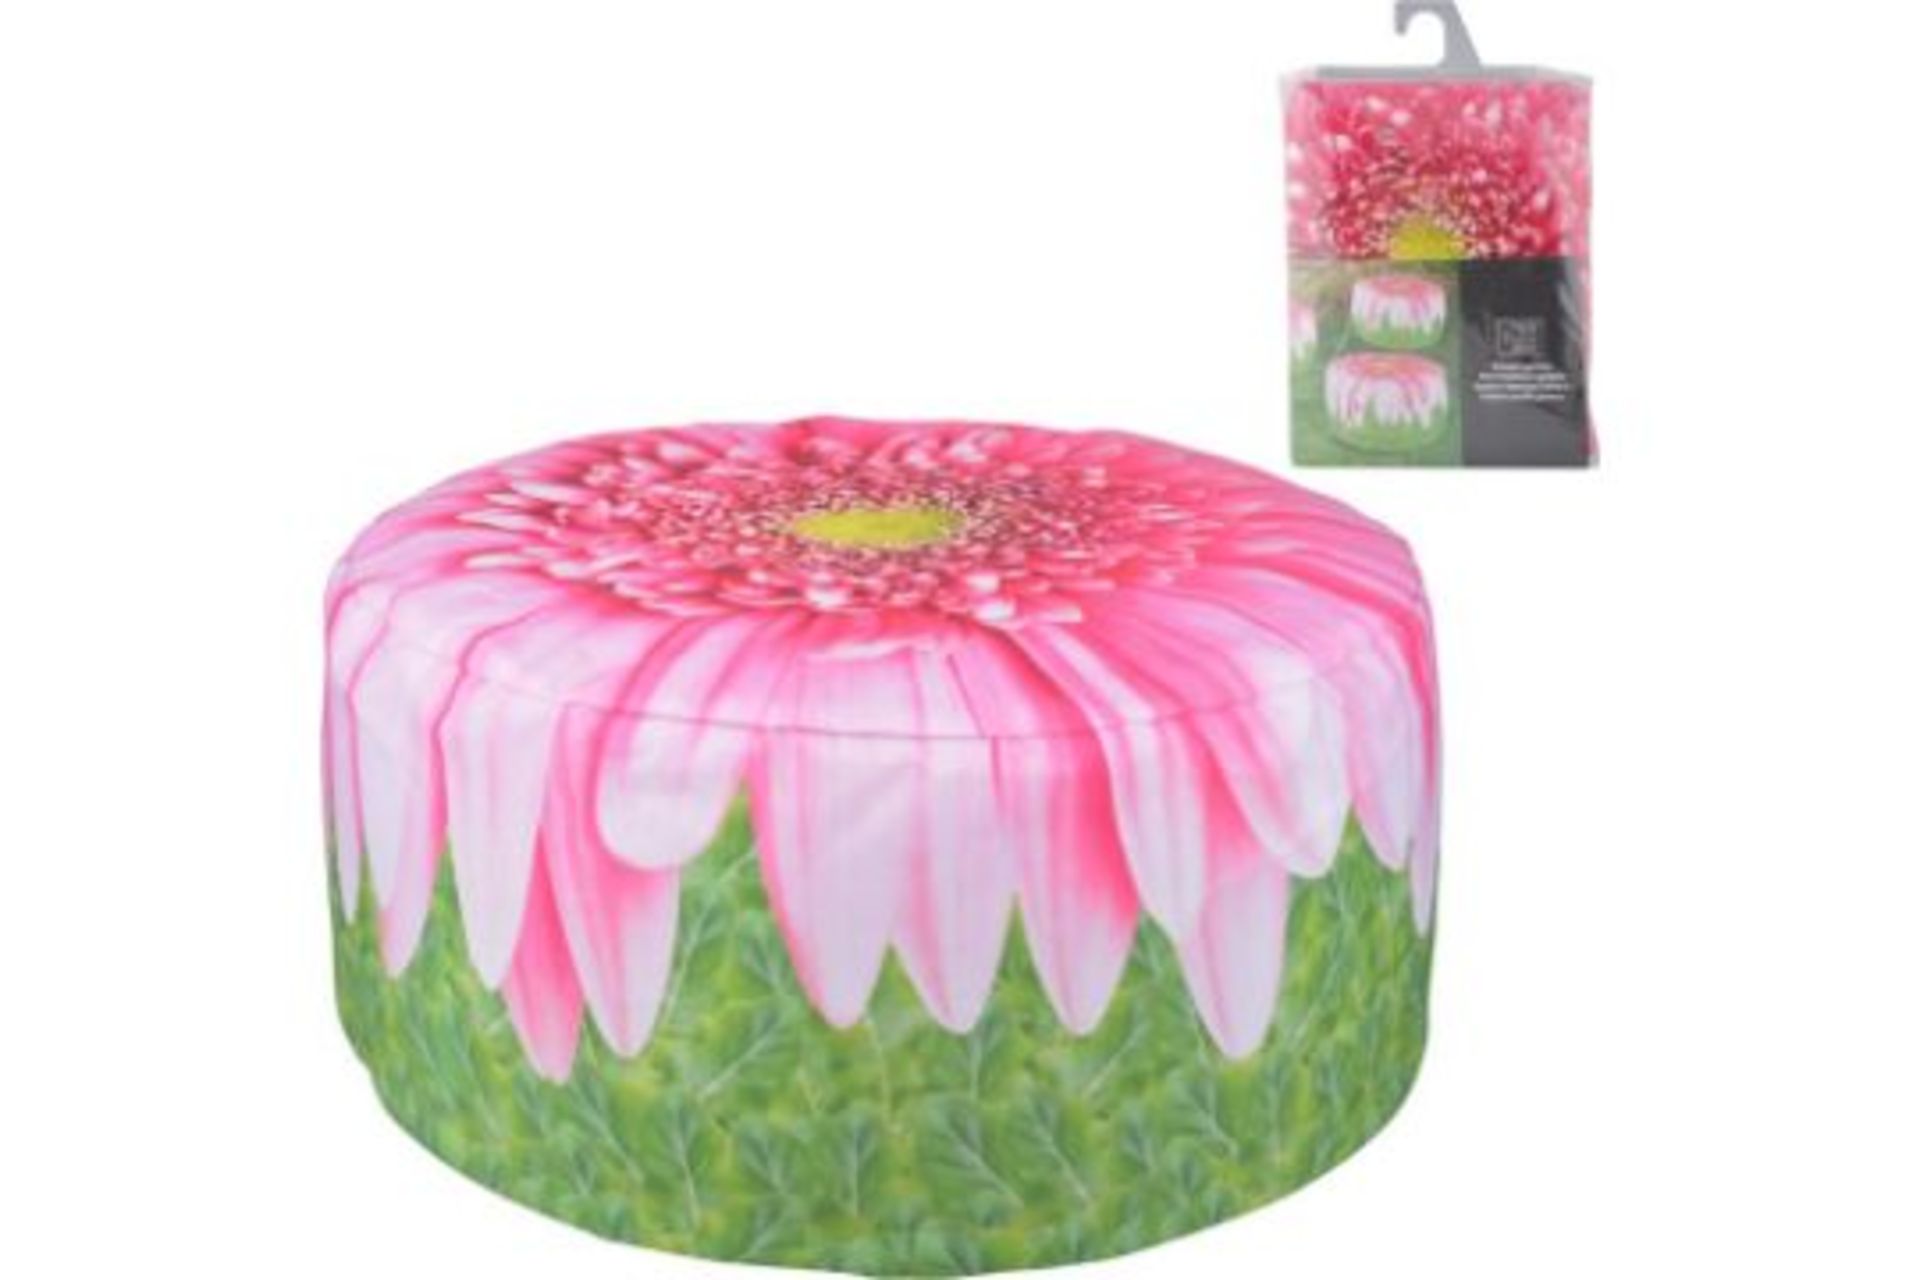 New Fallen Fruits - Outdoor pouffe gerbera daisy- inflatable for easy storage